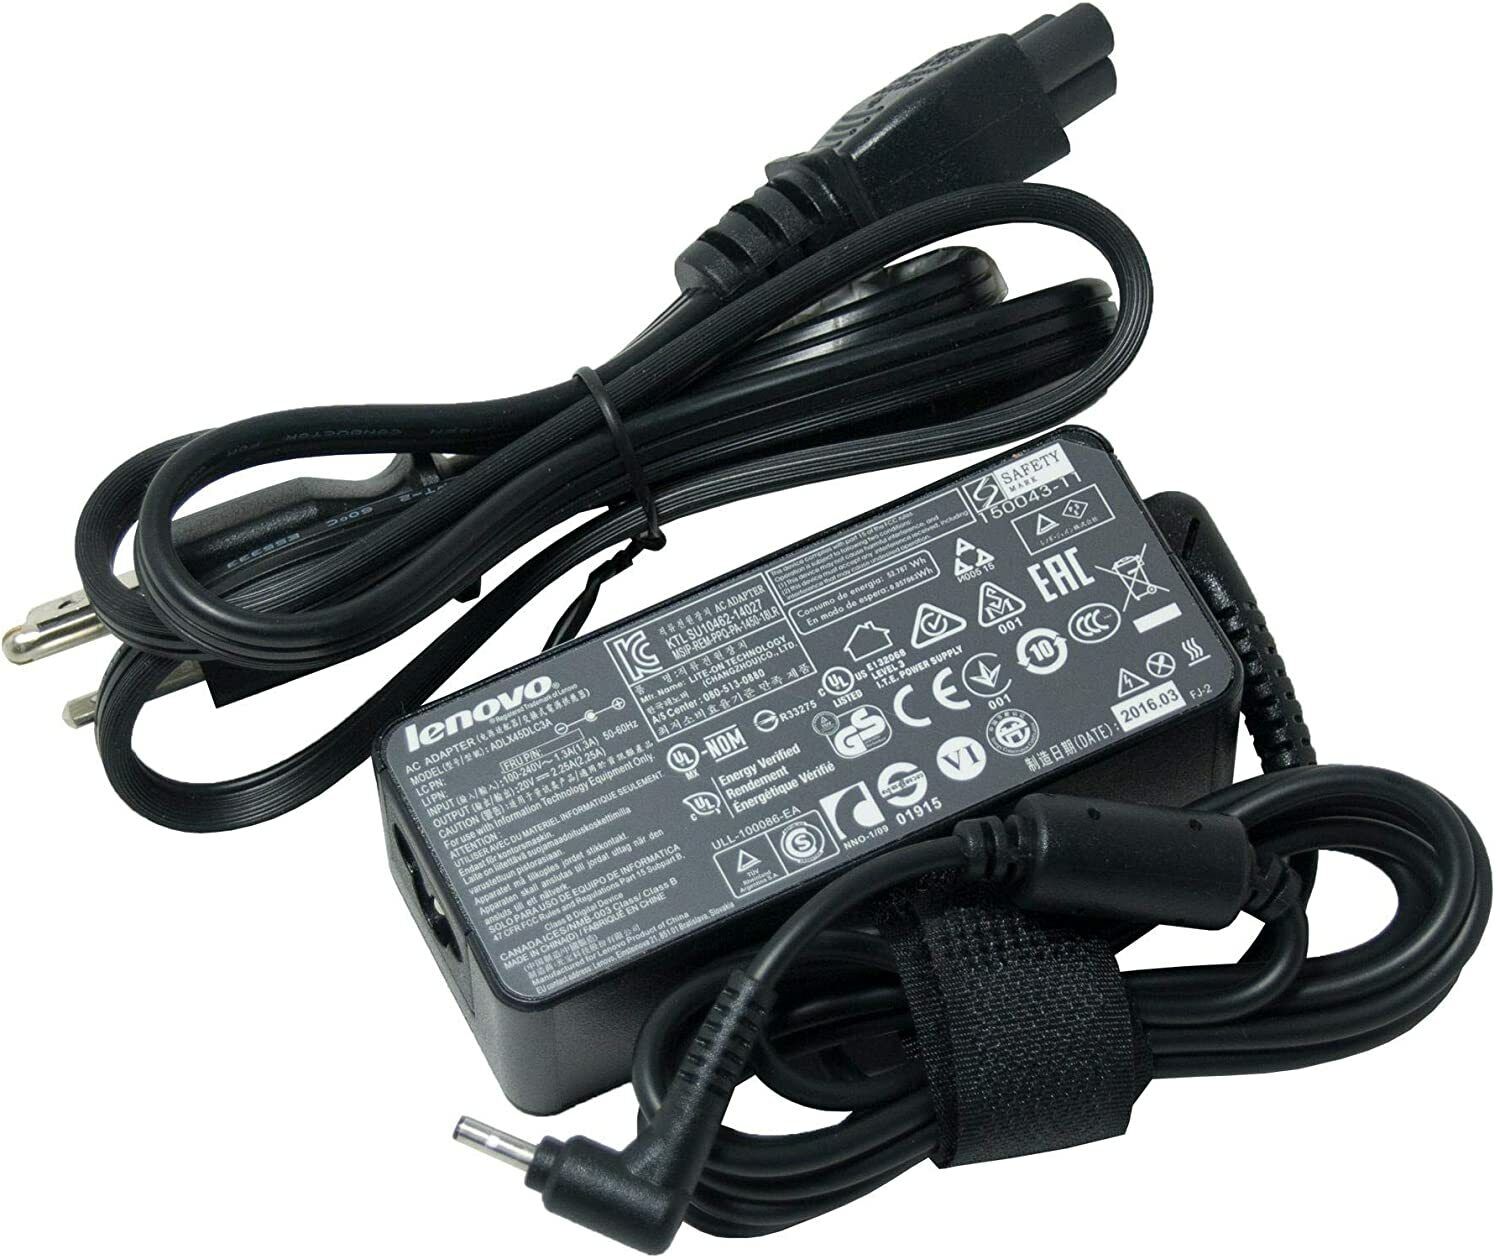 Original AC Adapter Charger for Lenovo N21 Chromebook 45W Model 80MG0000US 